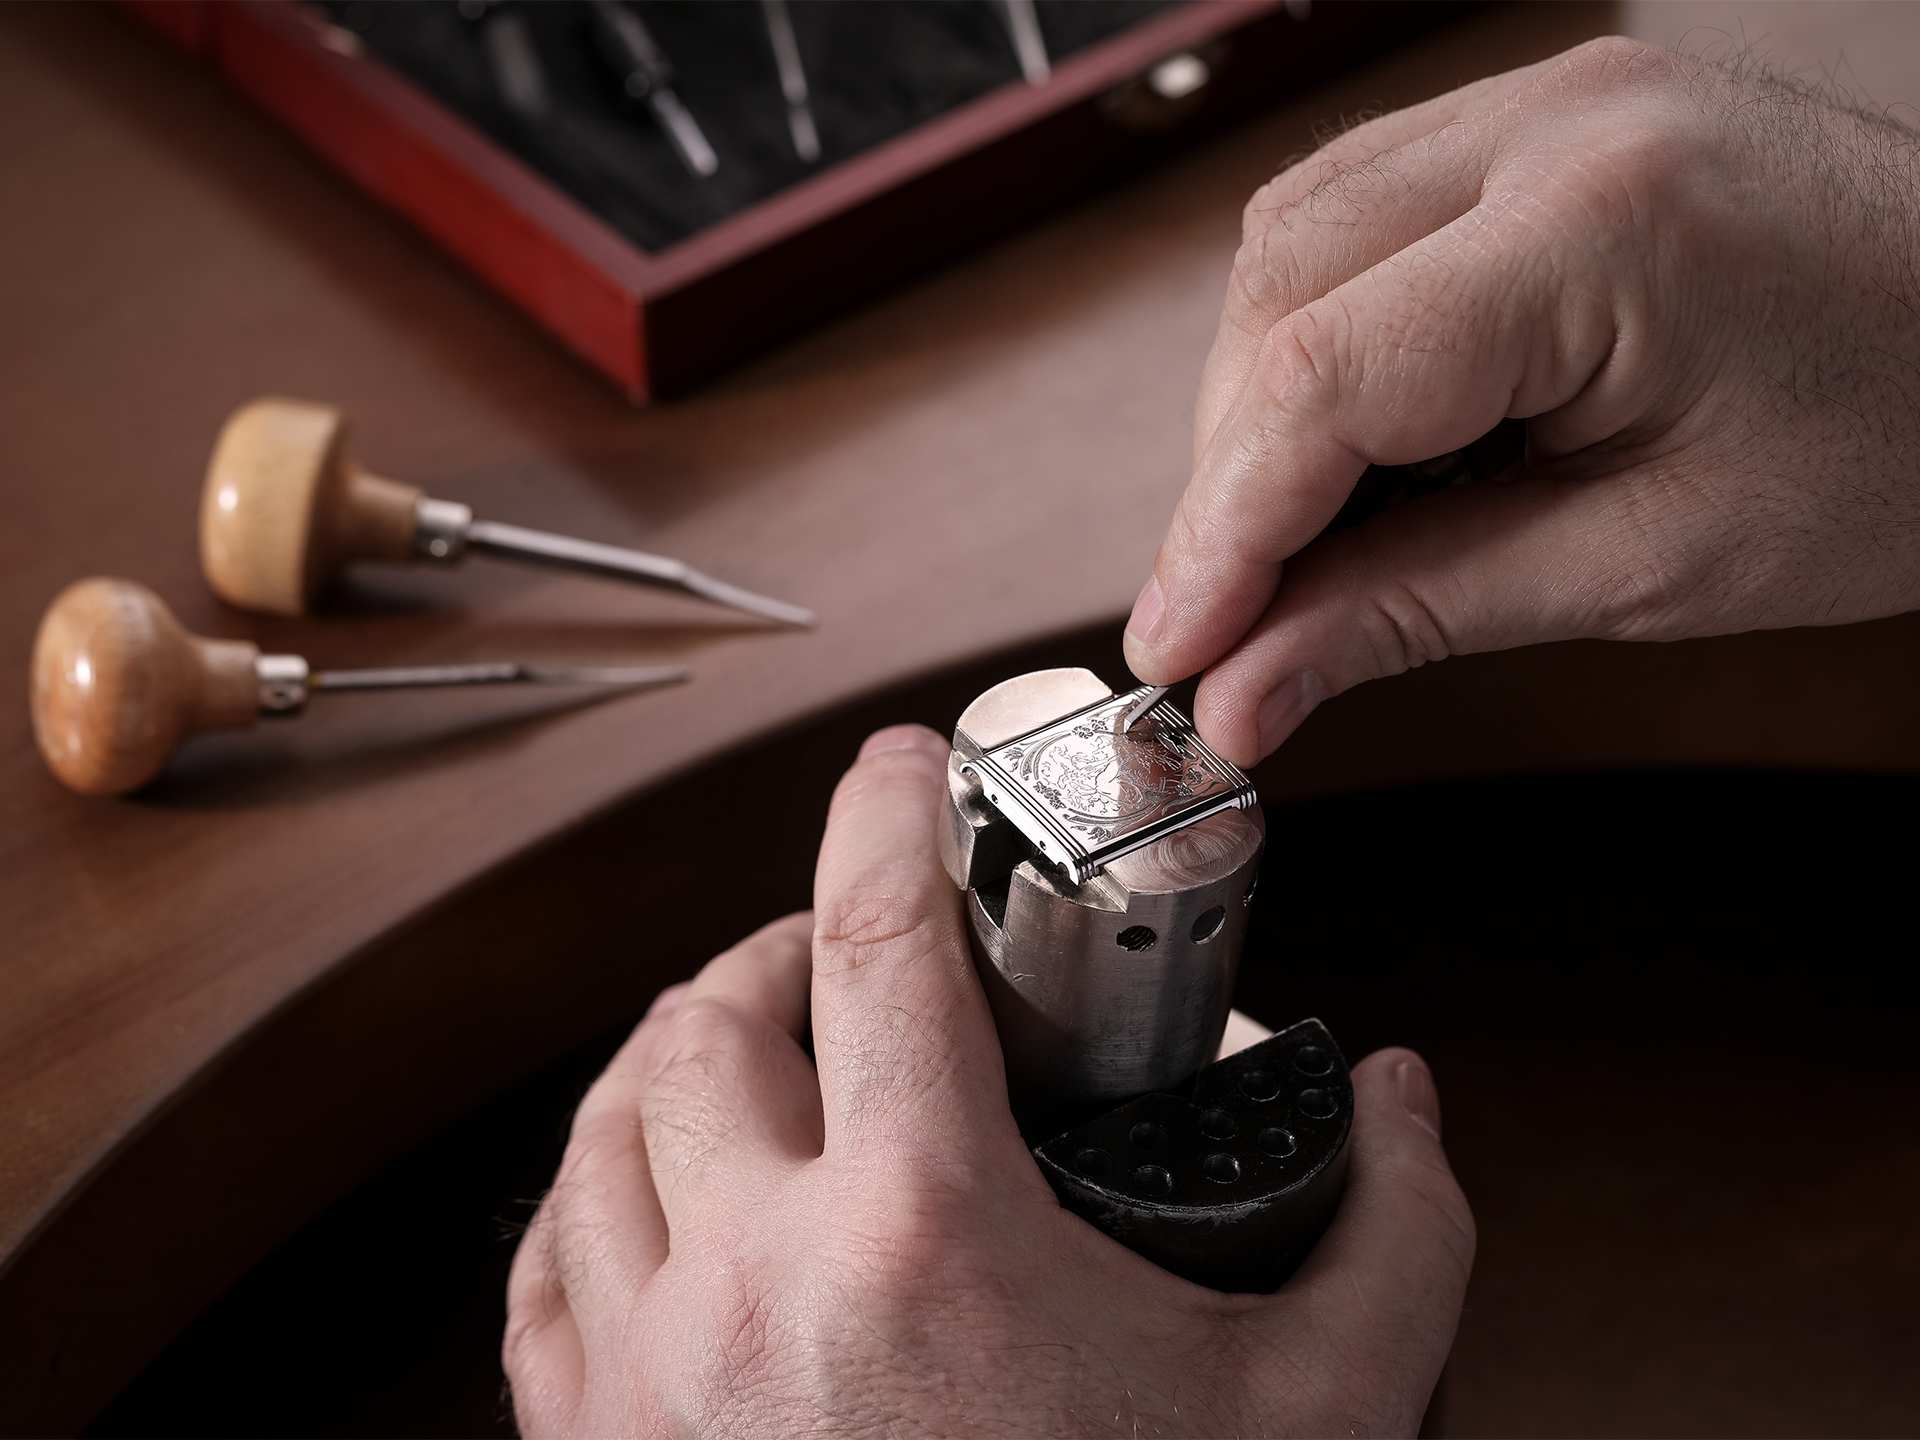 Hand engraving at Jaeger-LeCoultre's watch factory